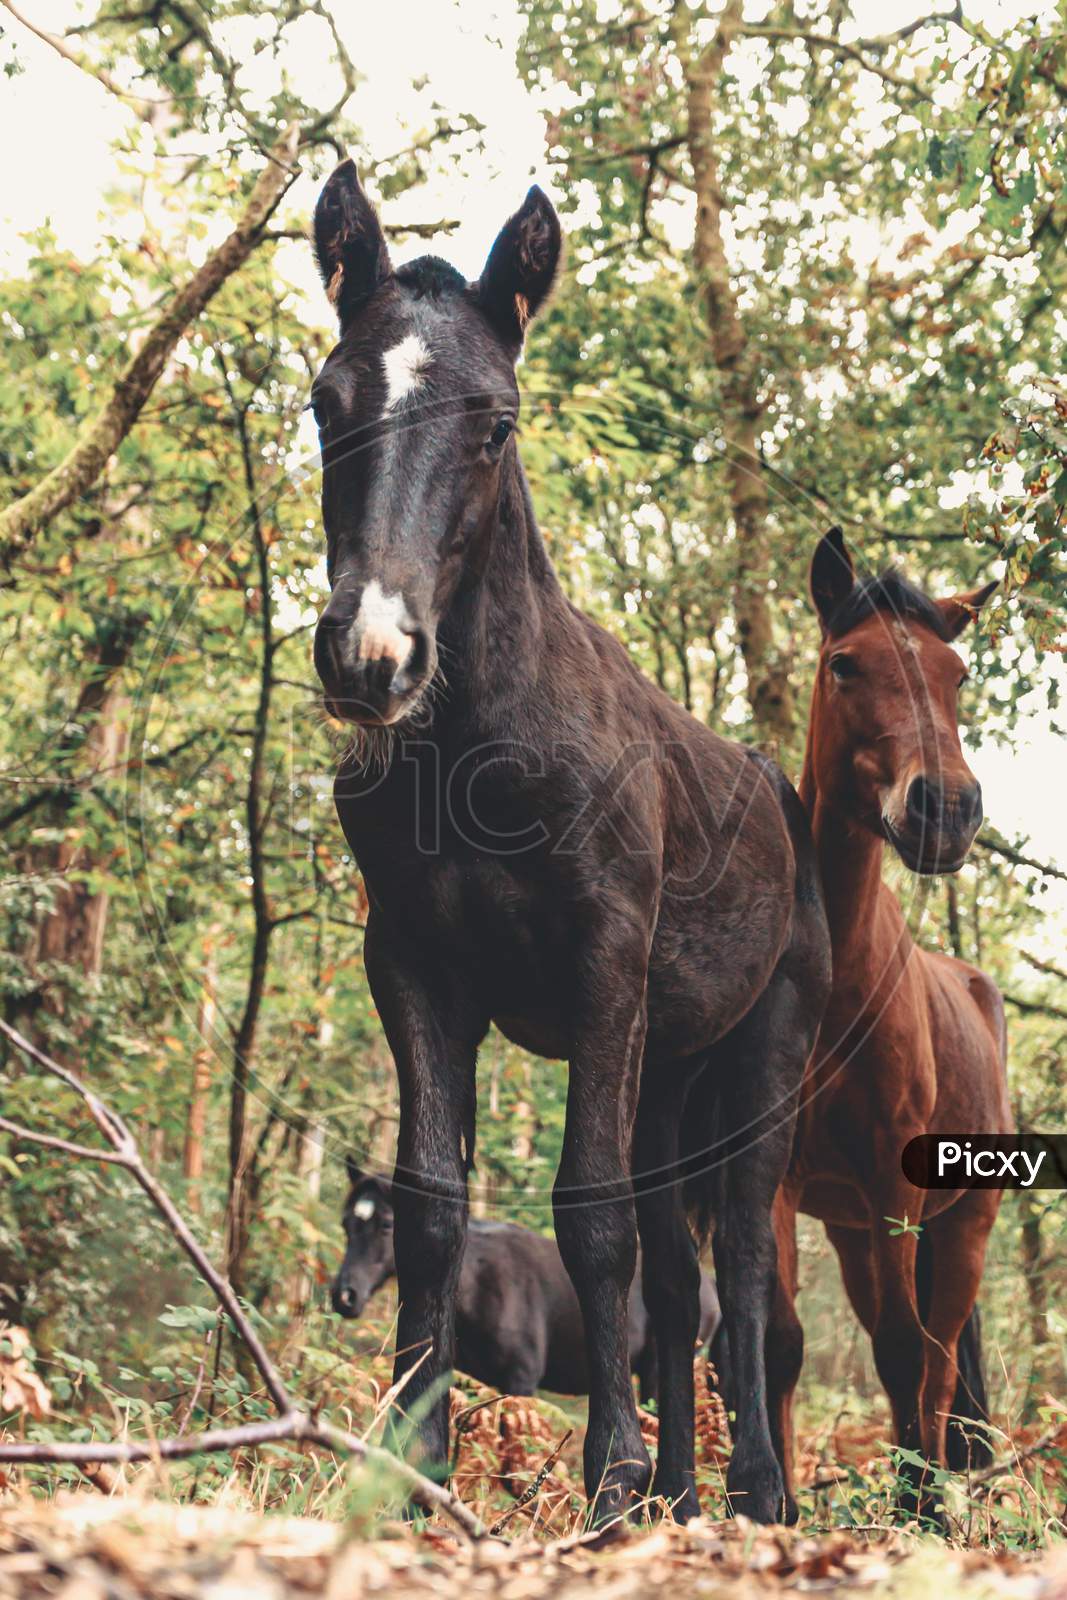 Close Up Of Some Curious Horses In The Middle Of The Forest Looking Straight To Camera During A Bright Day